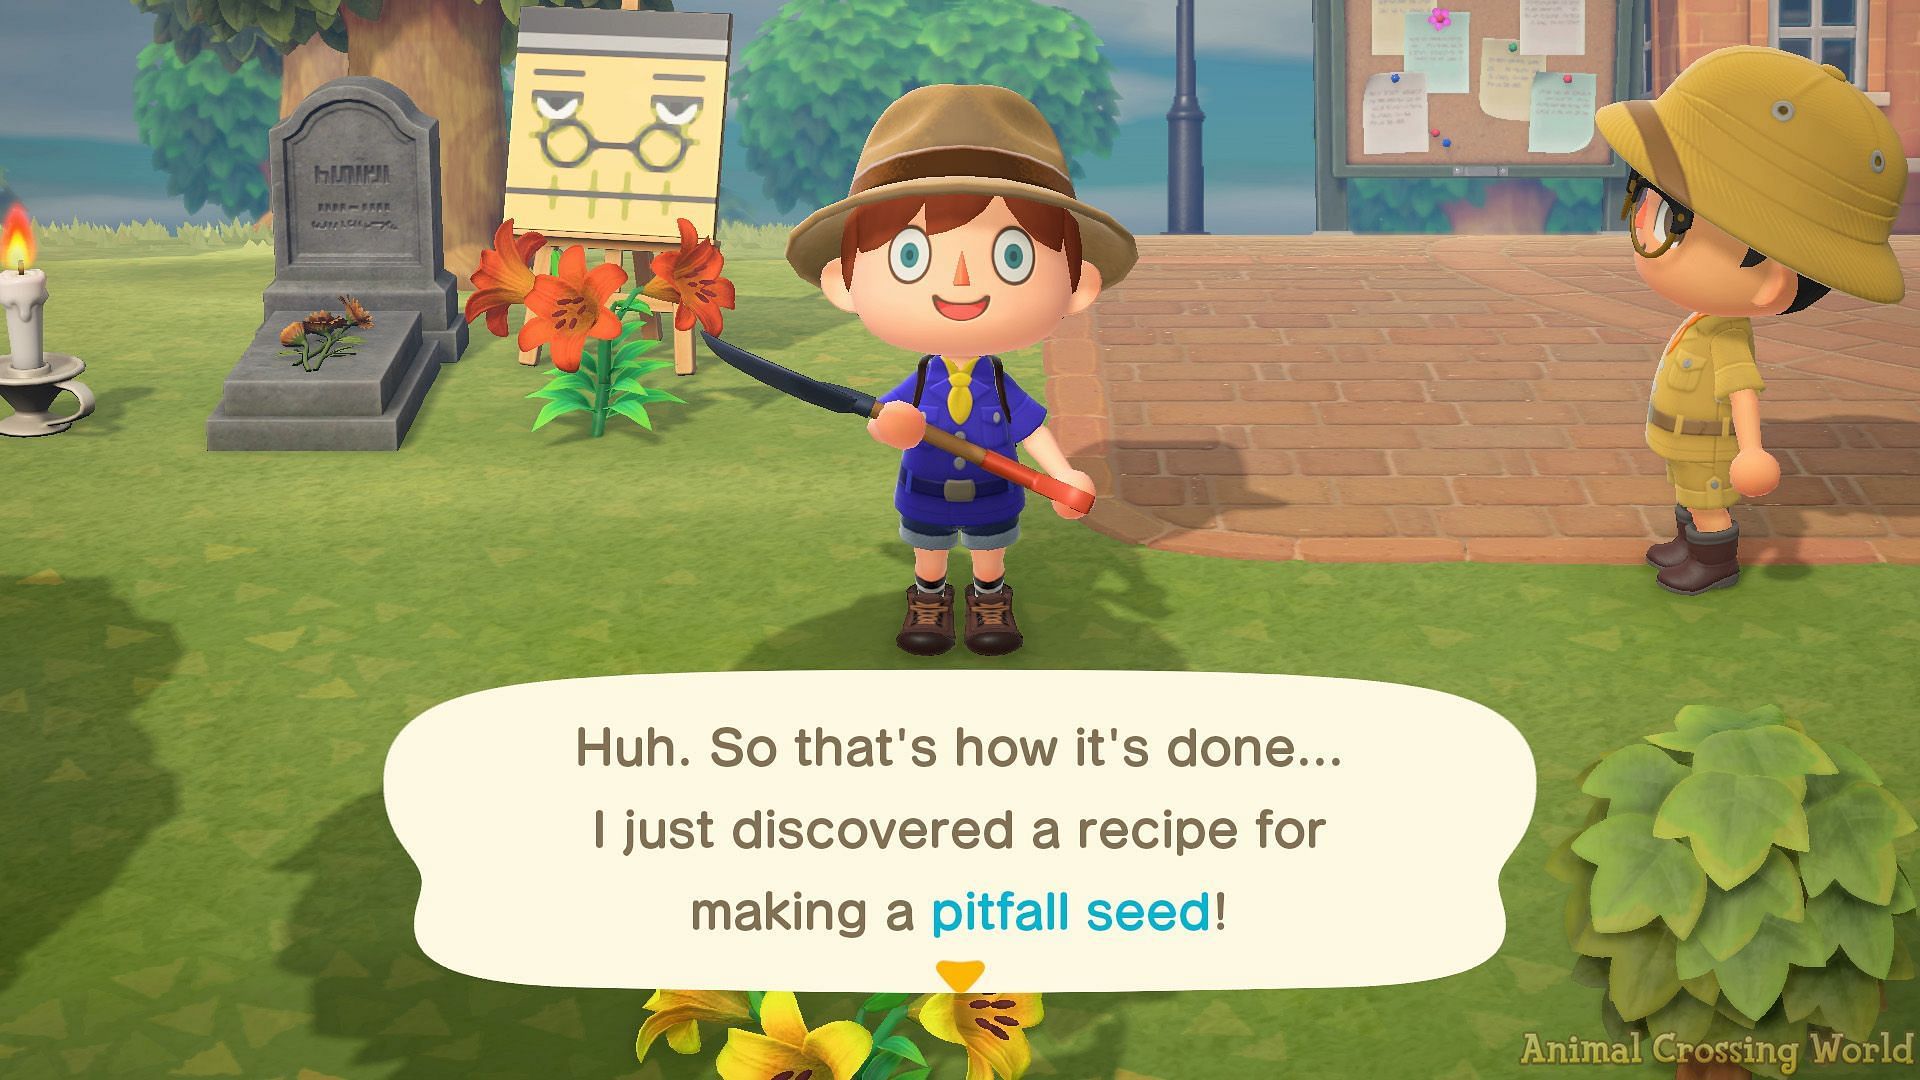 There are a few different ways of learning the recipe for pitfall seeds. Image via Animal Crossing World